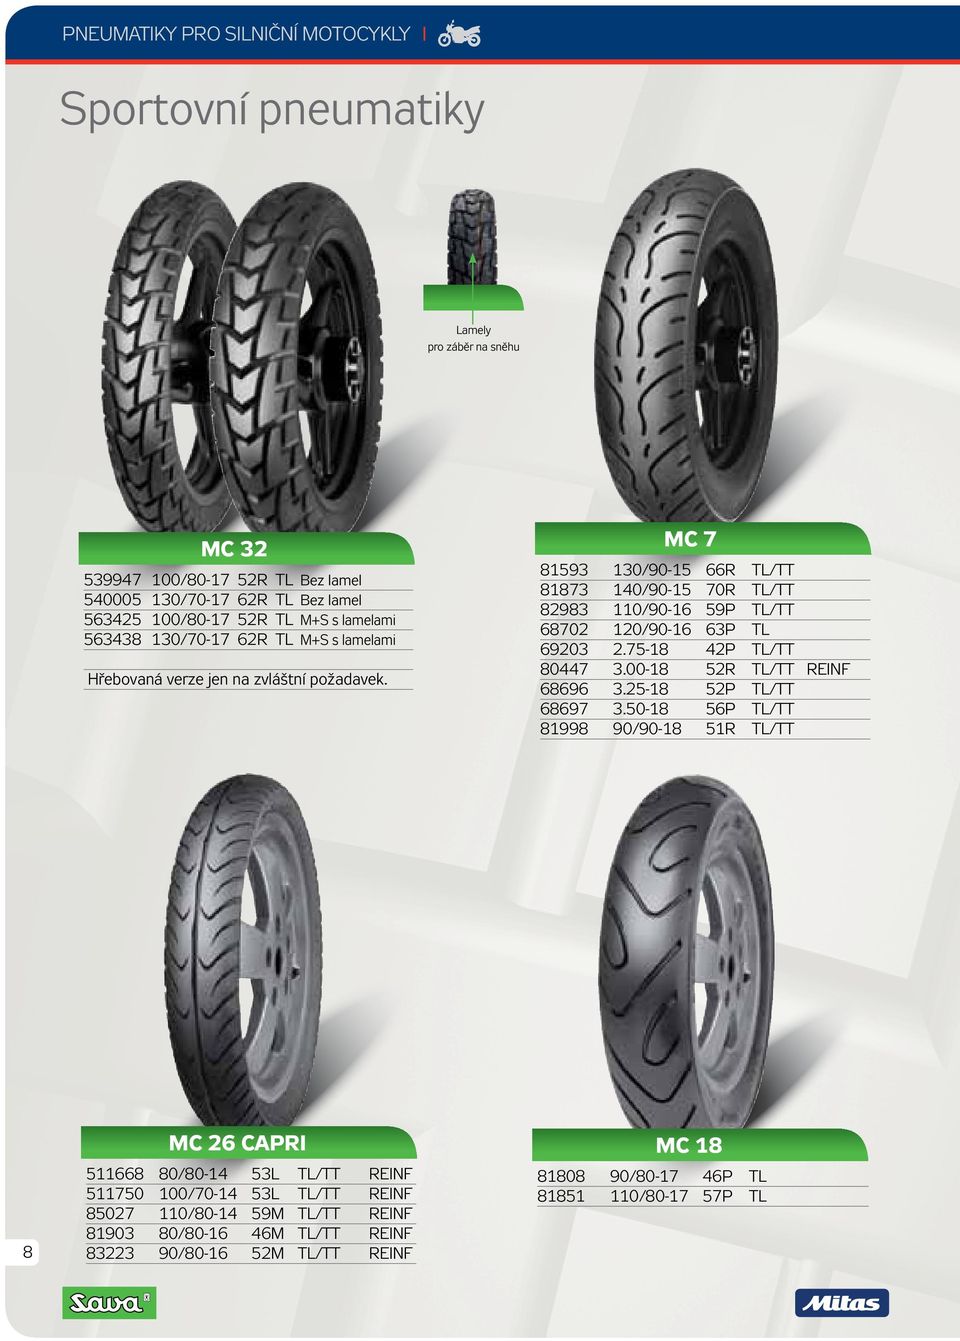 MC 7 81593 130/90-15 66R TL/TT 81873 140/90-15 70R TL/TT 82983 110/90-16 59P TL/TT 68702 120/90-16 63P TL 69203 2.75-18 42P TL/TT 80447 3.00-18 52R TL/TT REINF 68696 3.